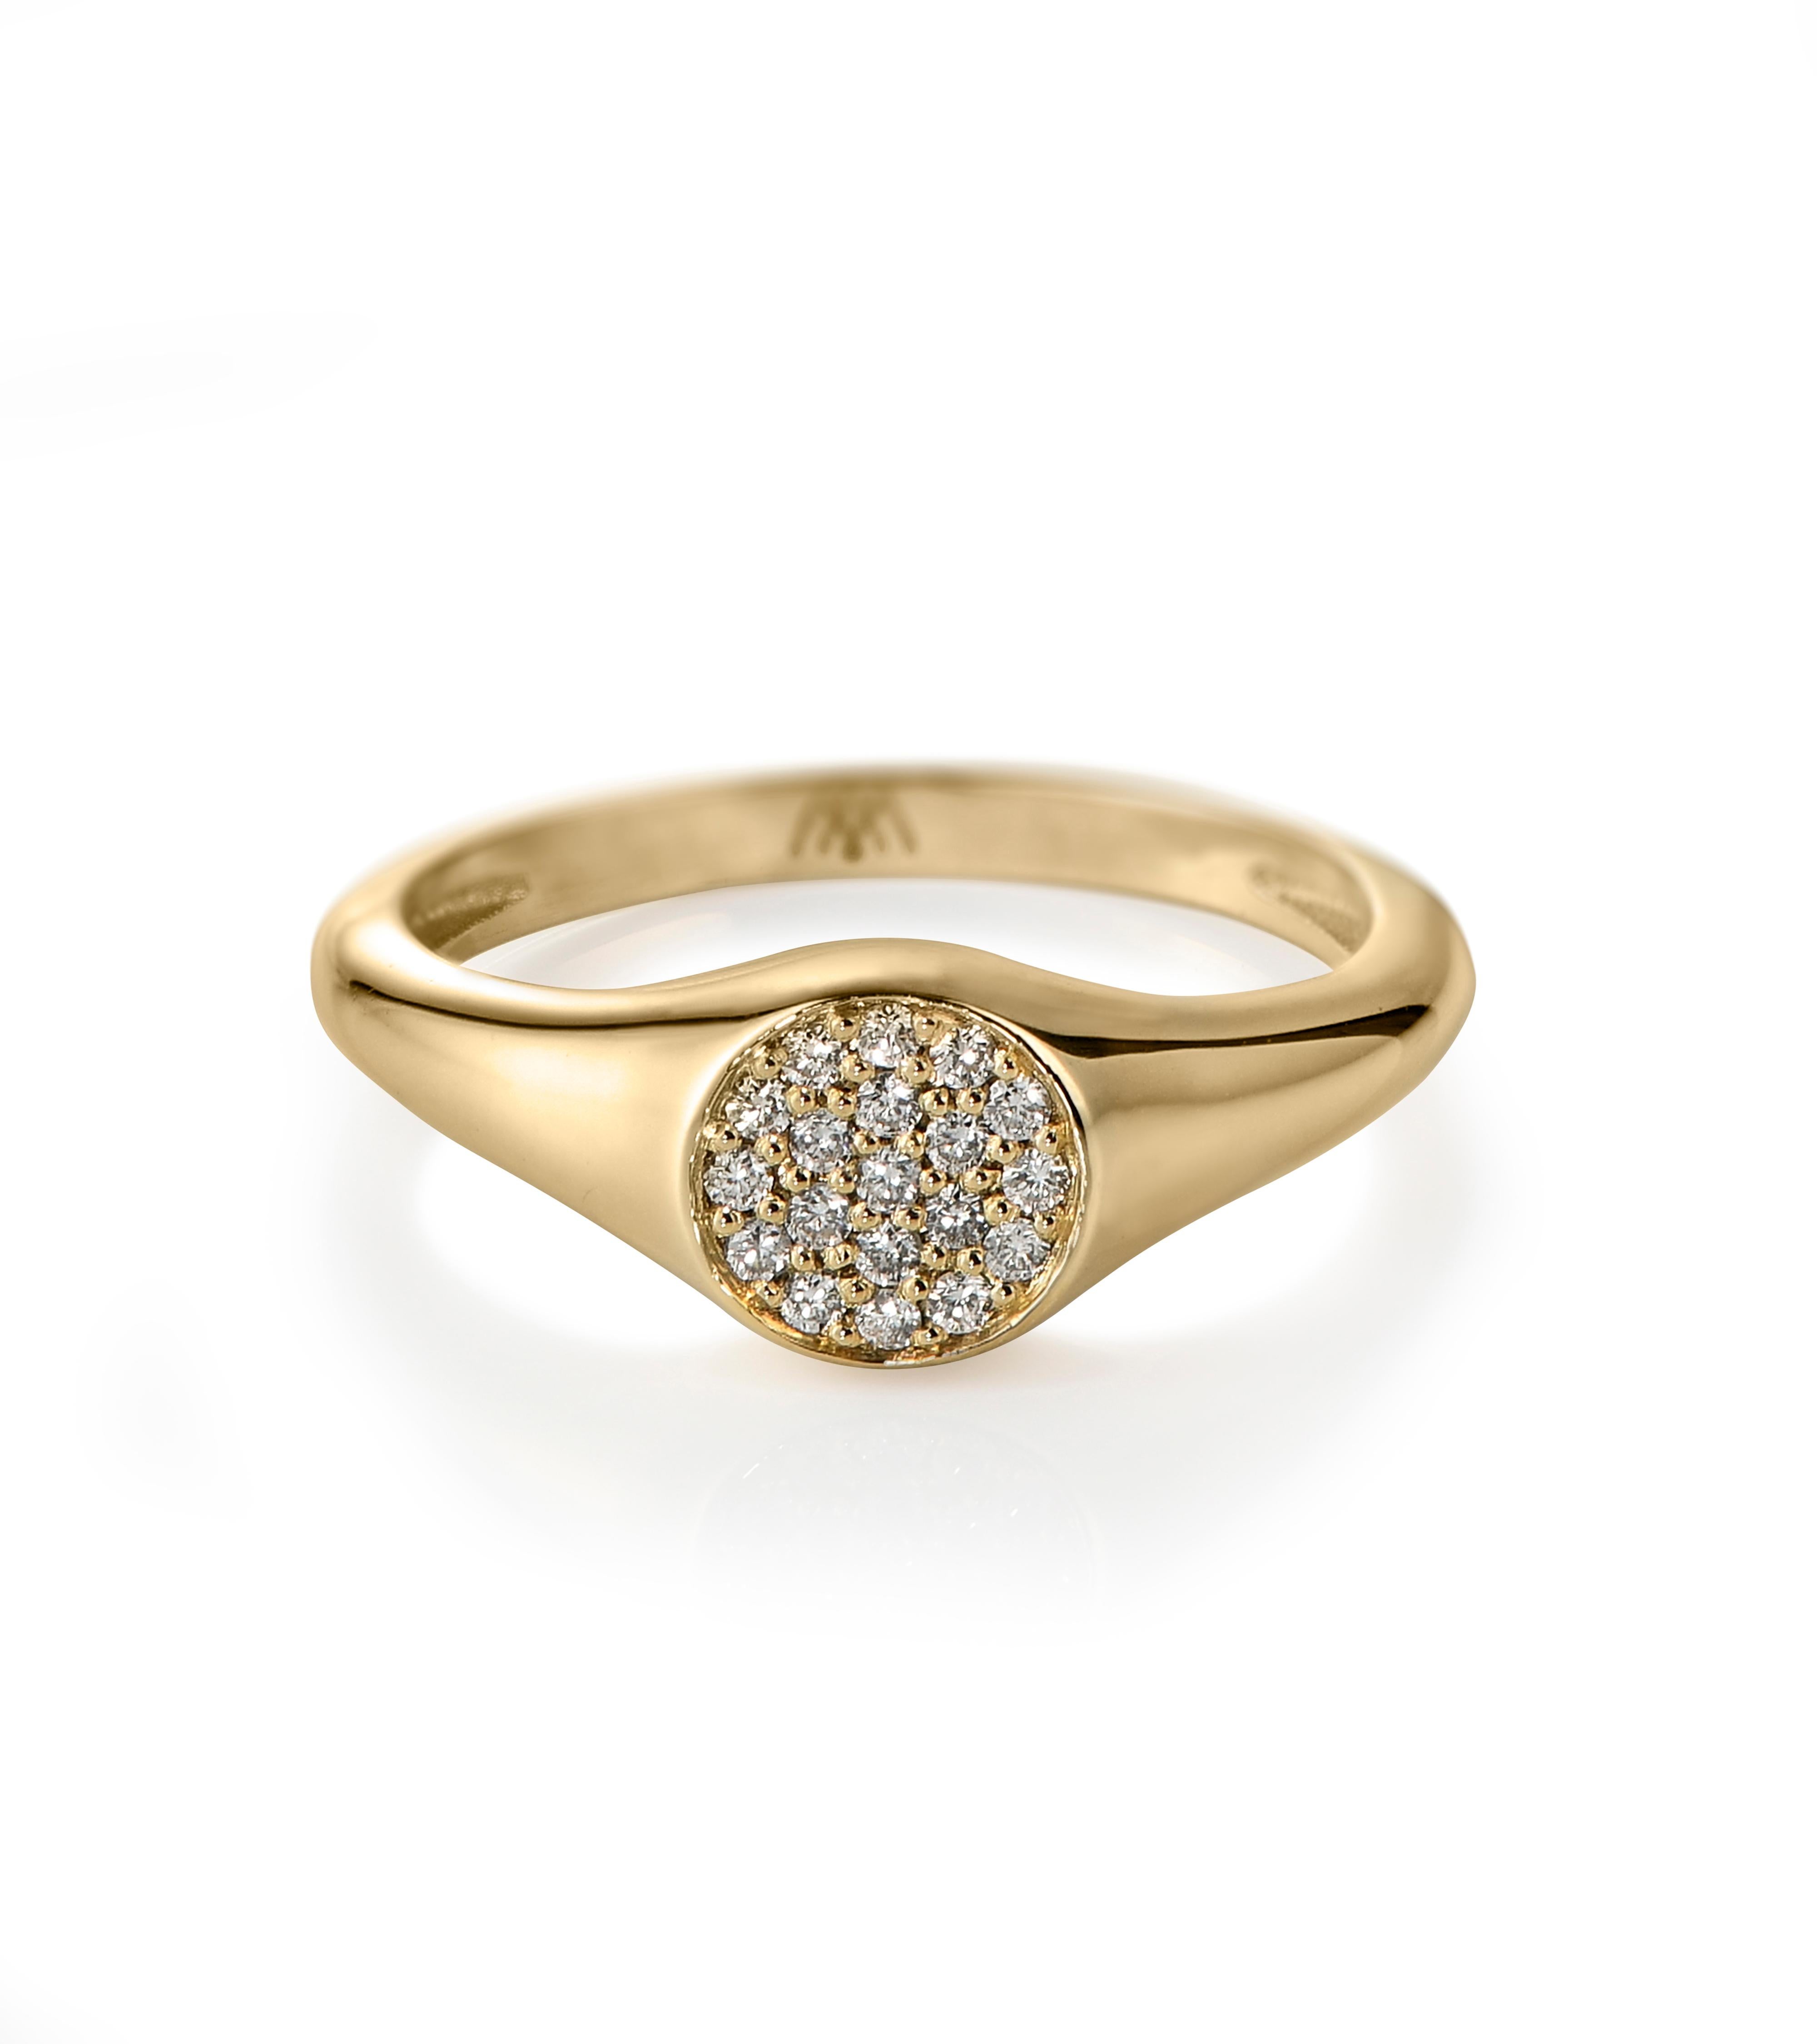 Our Diamond Disk Signet Ring, is designed to fit comfortably on your pinky finger and will become your new staple piece. It is set with natural diamonds that look like glitter, in 18Karat Yellow Gold.

All of our orders are delivered in a black